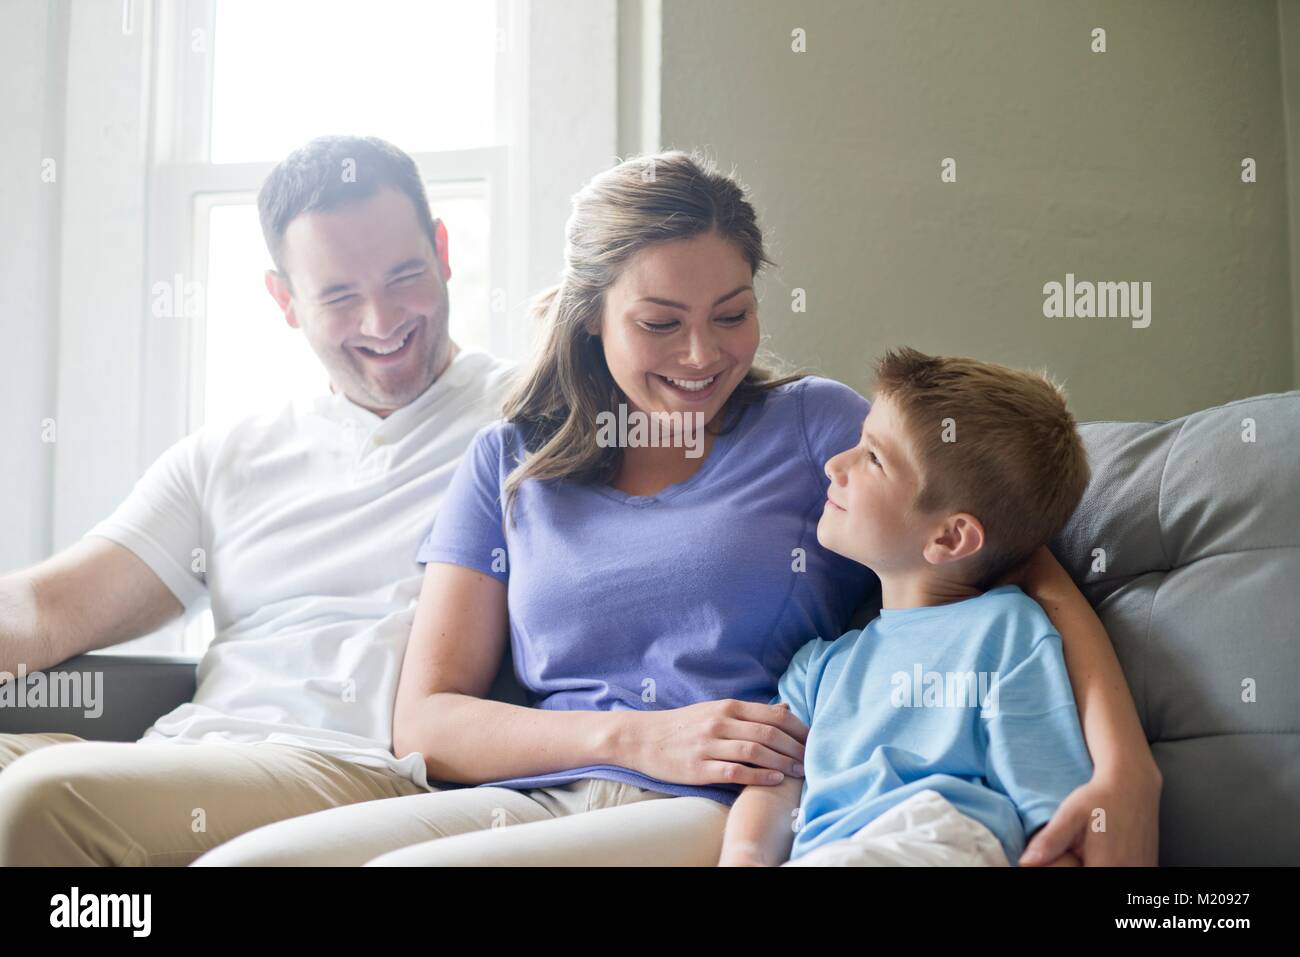 Boy sitting on sofa with his mother and father, portrait. Stock Photo